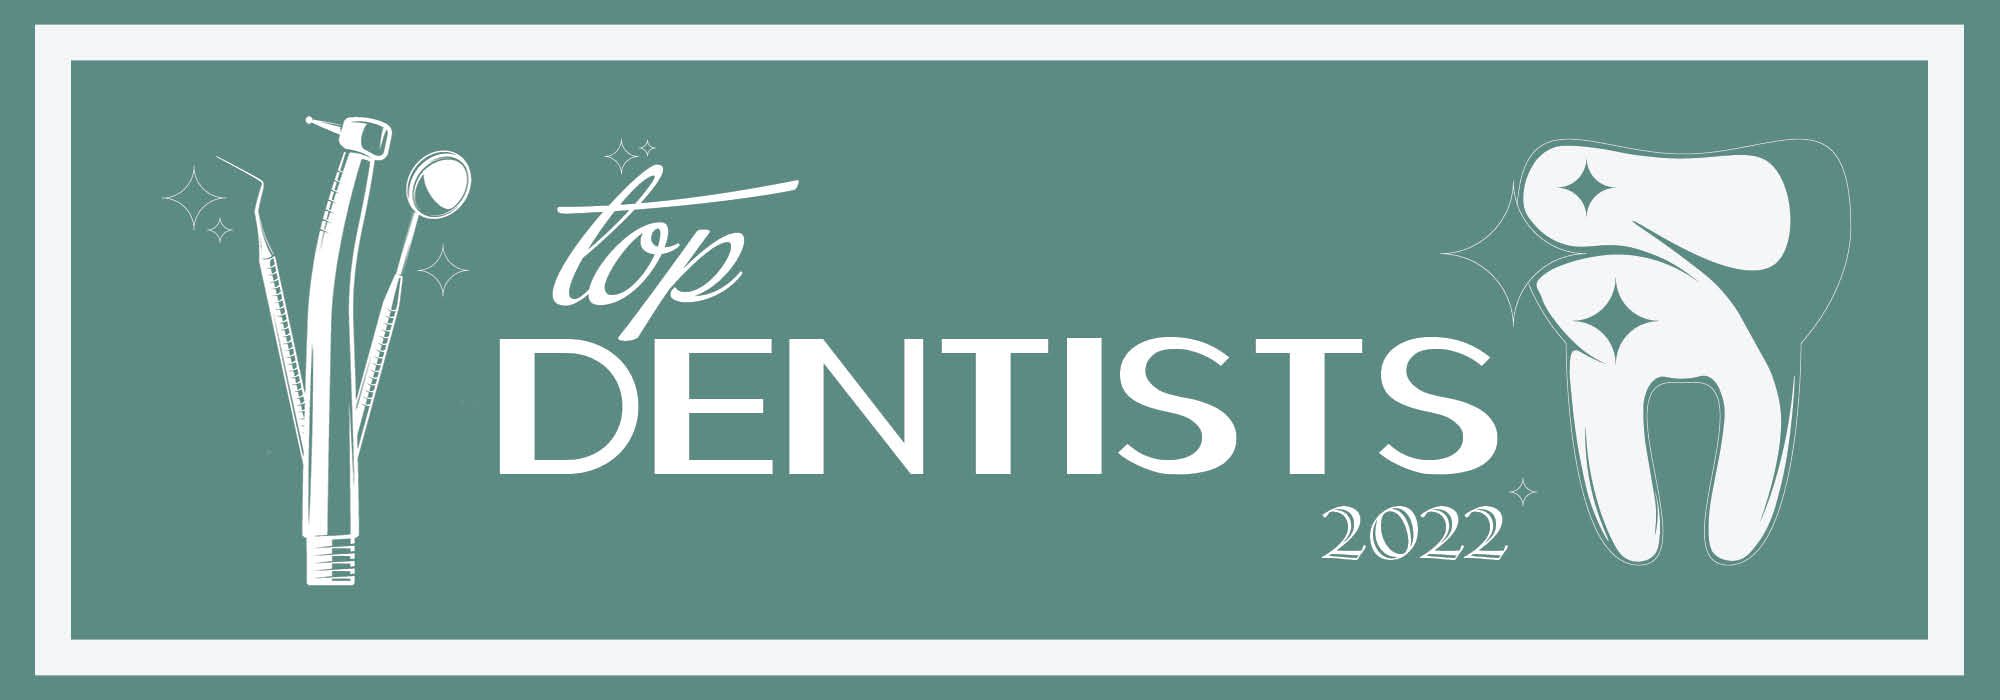 417 Magazine's Top Dentists of 2022